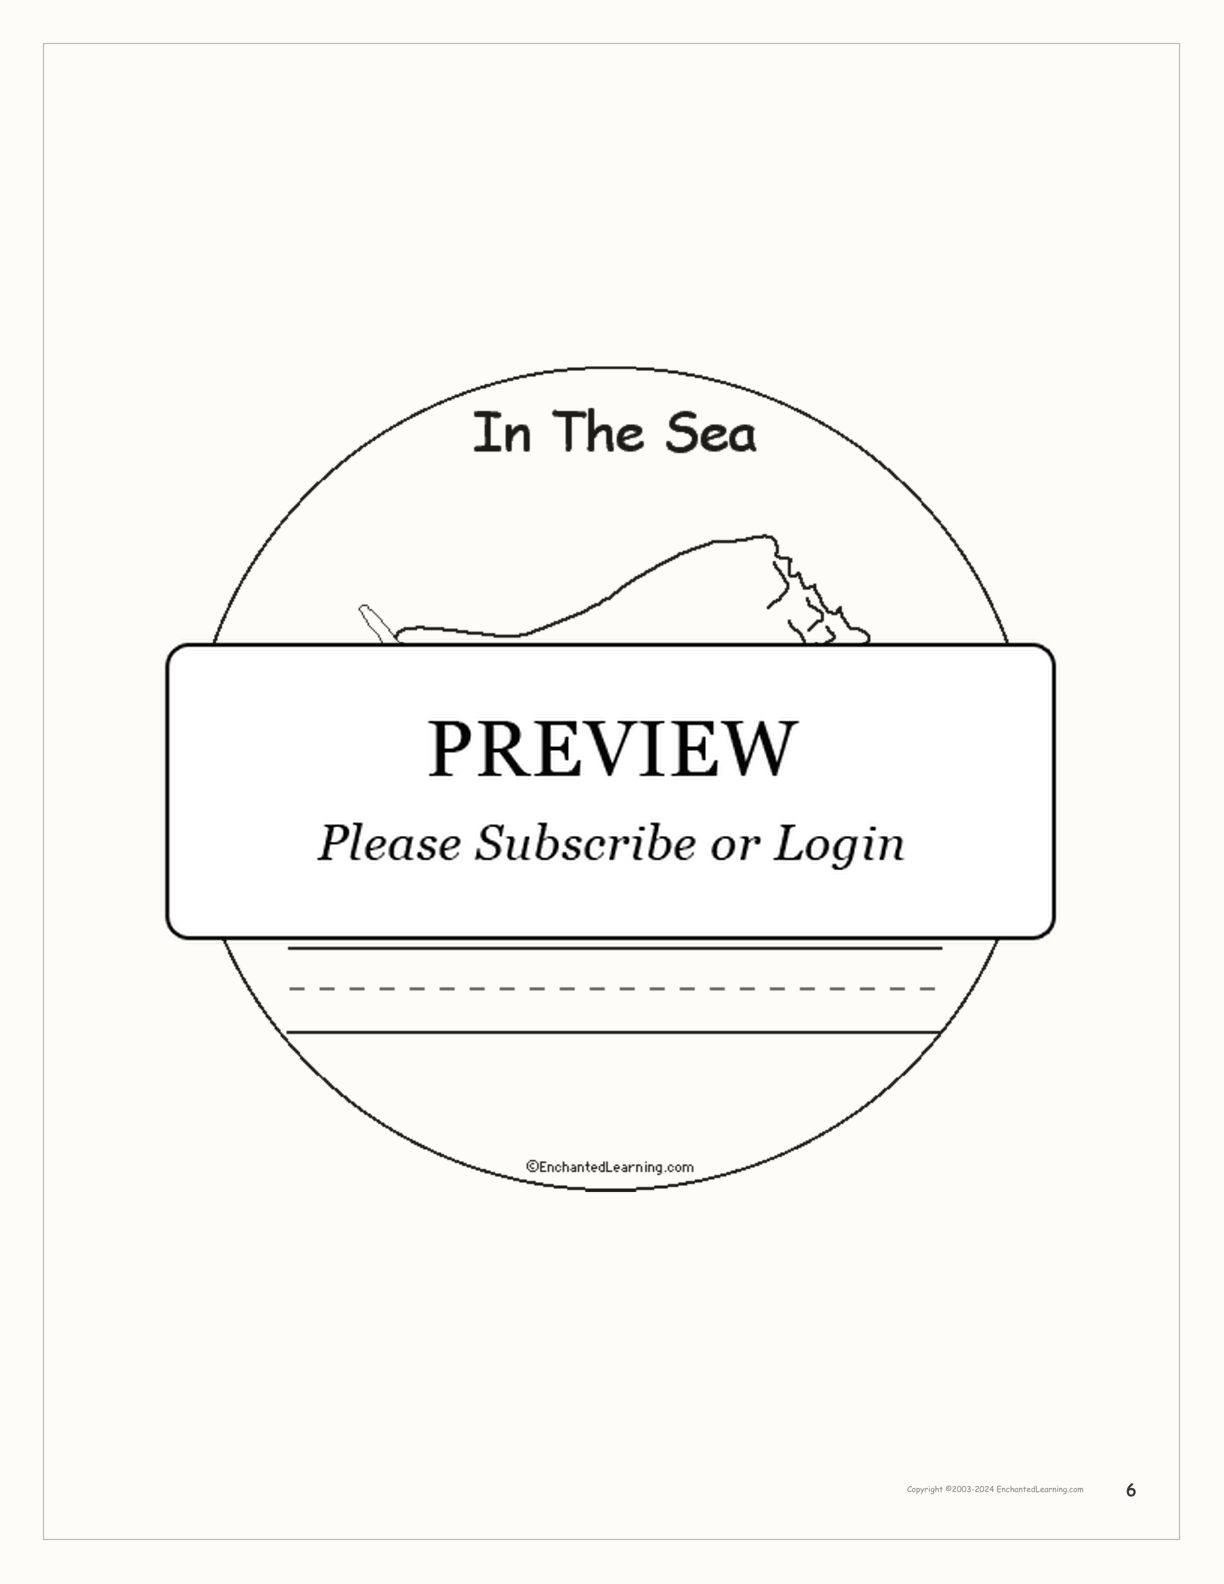 In The Sea: Early Reader Book interactive printout page 6